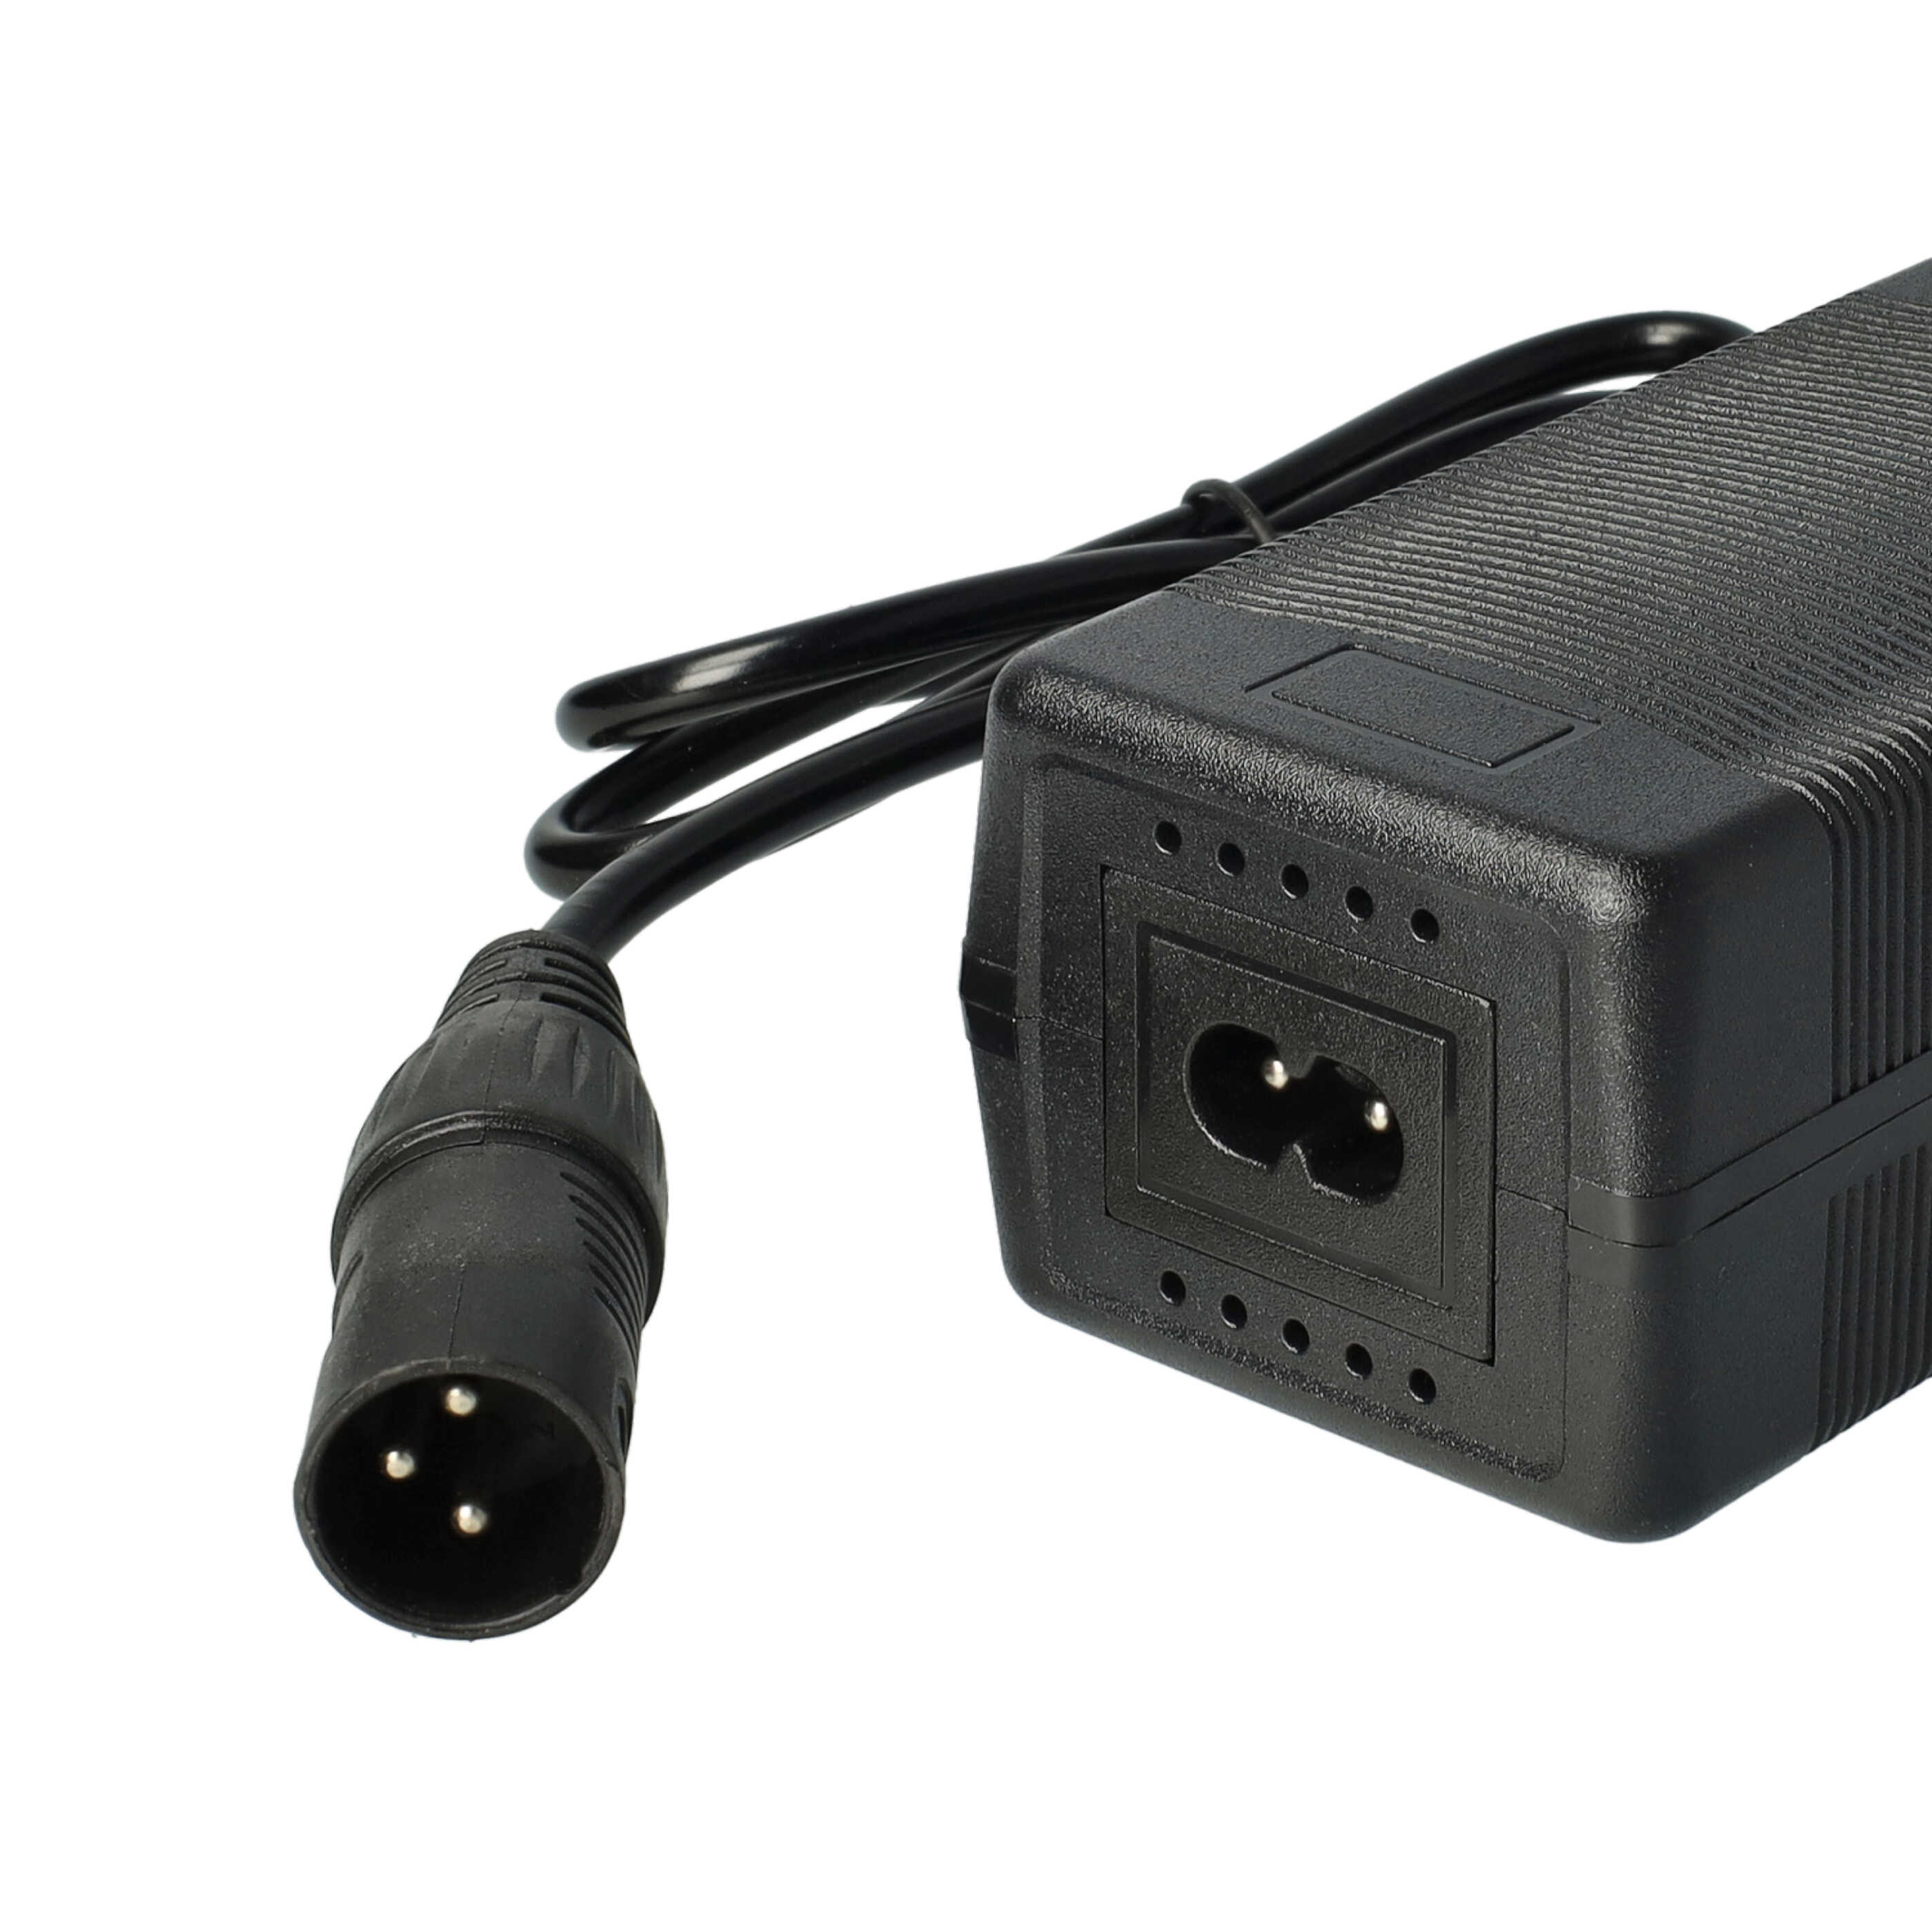 Charger suitable for Li-Ion E-Bike Battery - With 3 Pin Connector, With XLR Connector, 2.35 A